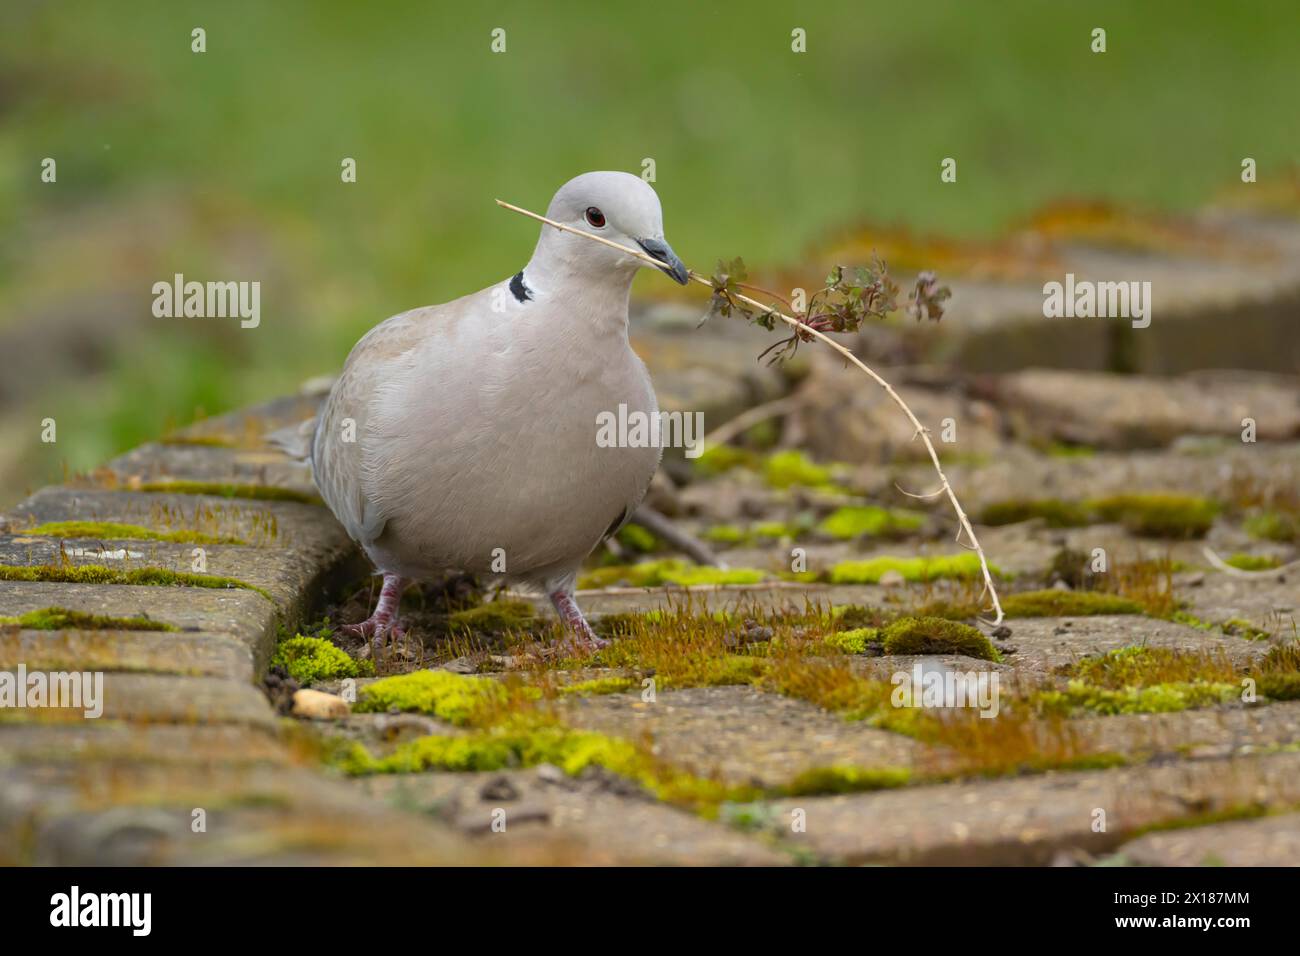 Collared dove (Streptopelia decaocto) adult bird with a stick for nesting material in its beak, Suffolk, England, United Kingdom Stock Photo